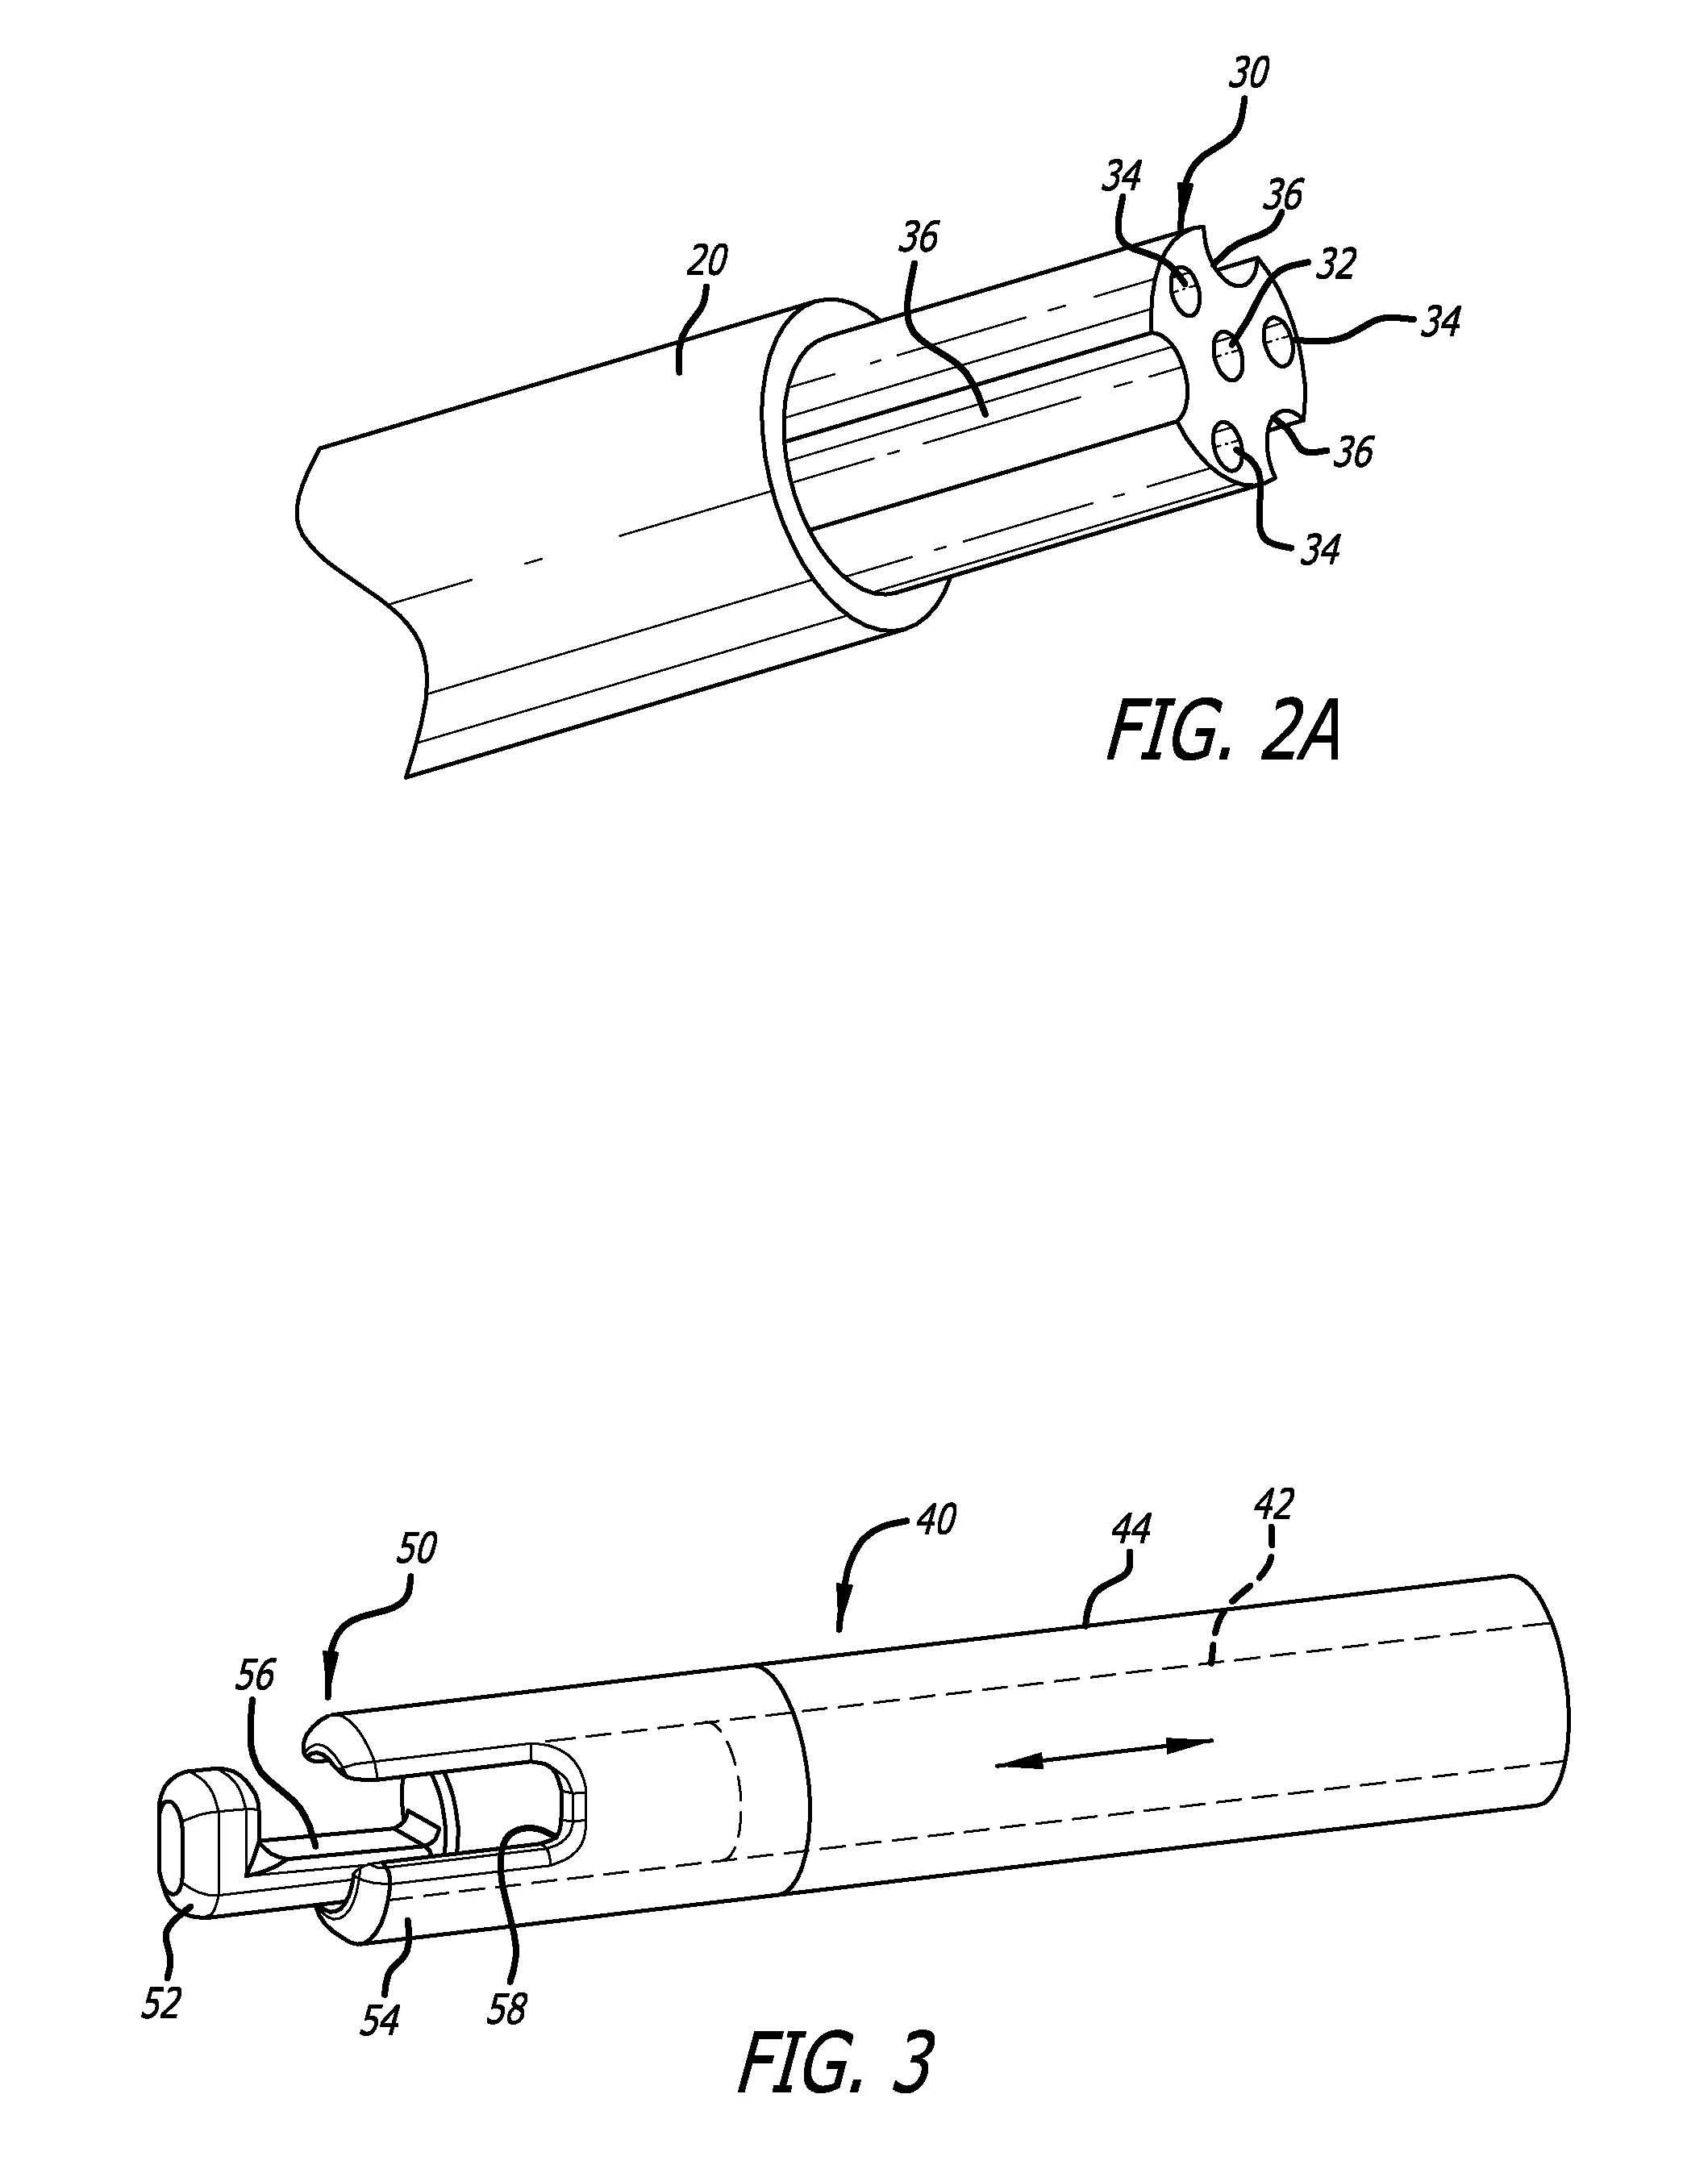 Inversion Delivery Device and Method For A Prosthesis